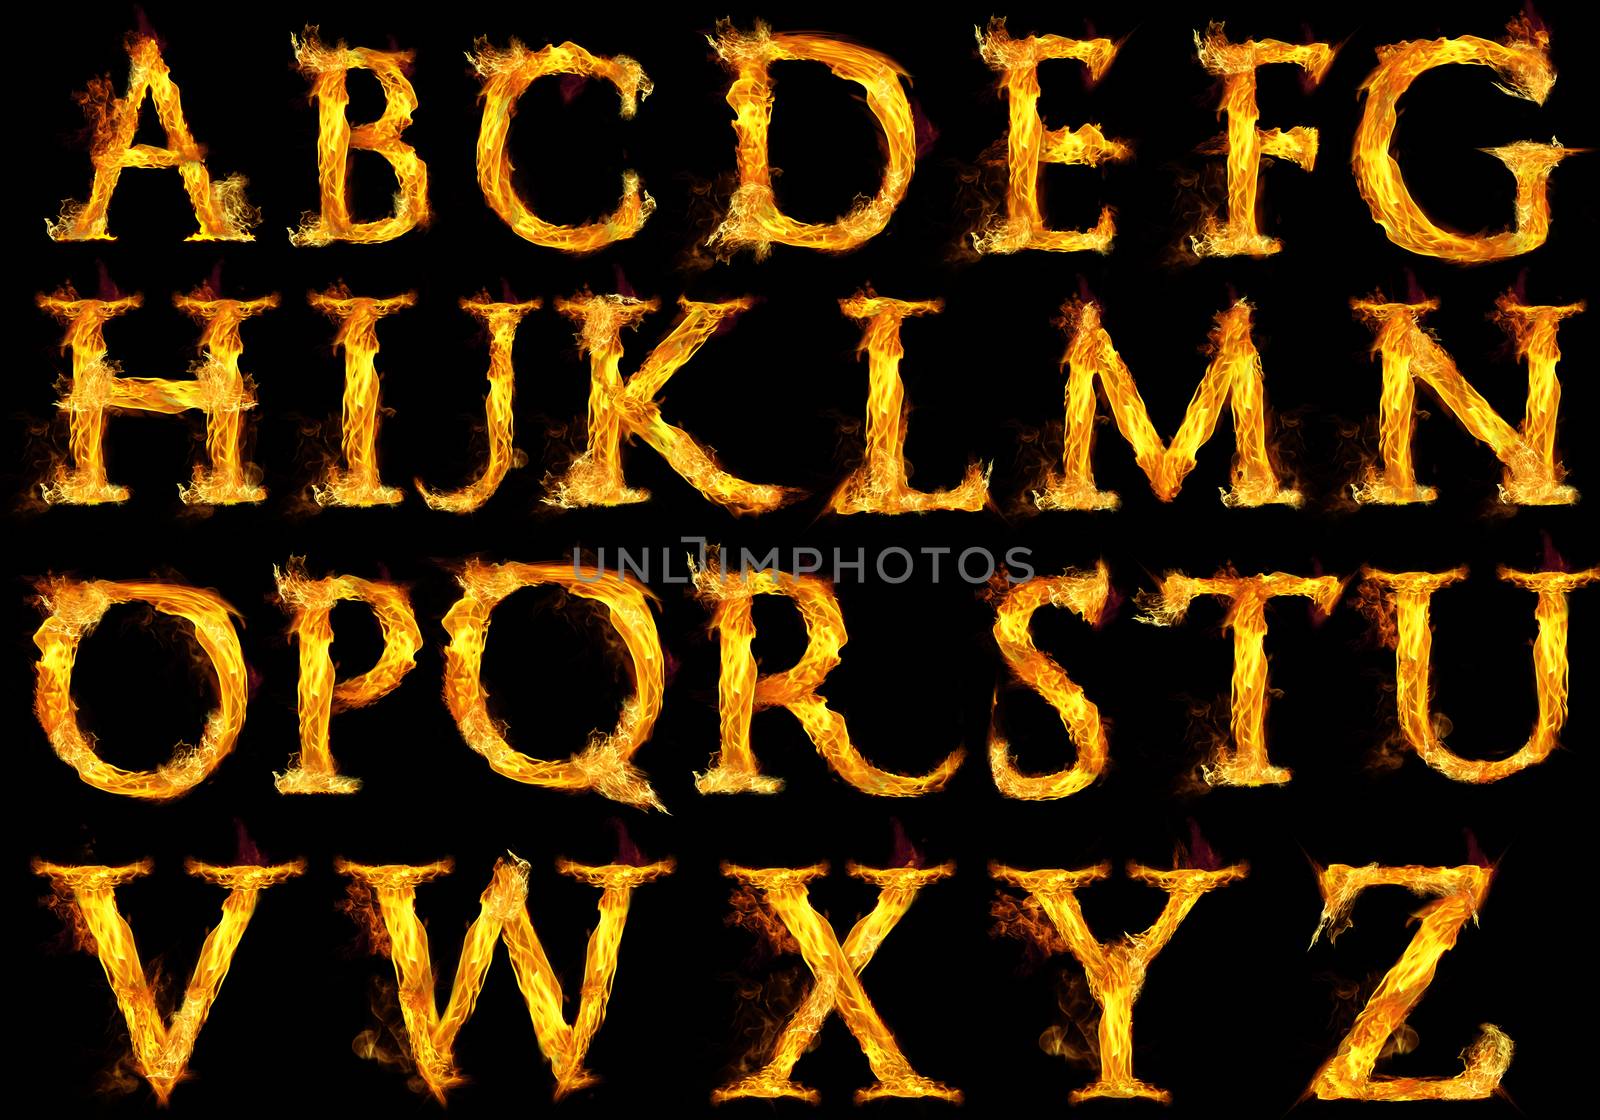 Capital letters of the alphabet with fire flames.